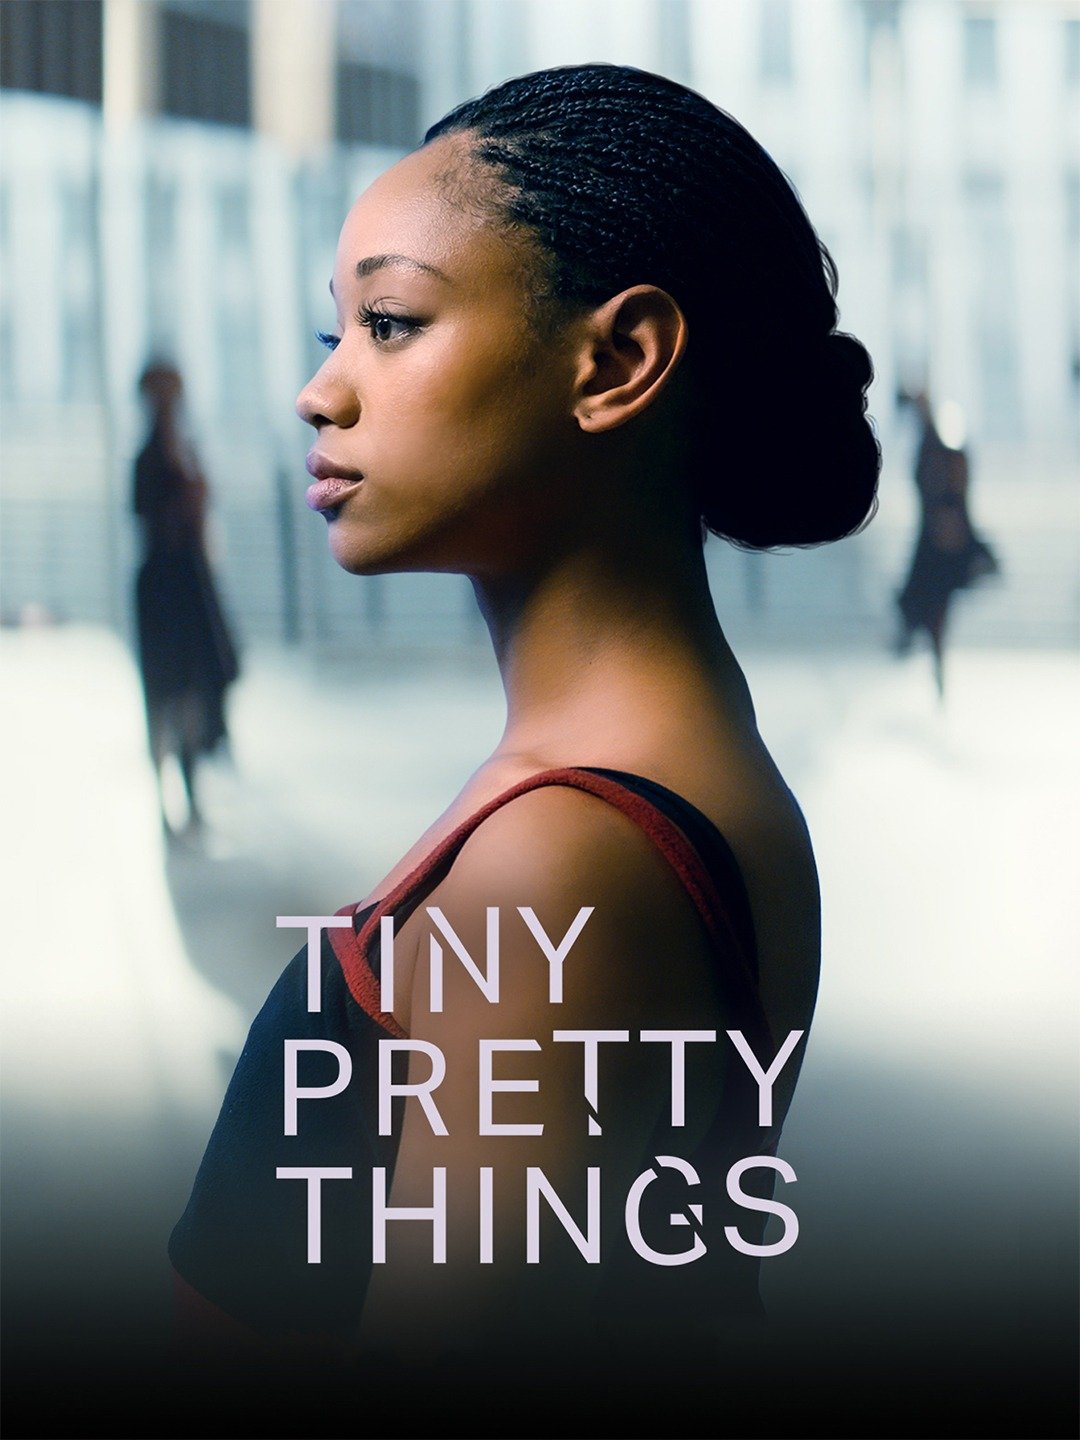 Tiny Pretty Things - Rotten Tomatoes